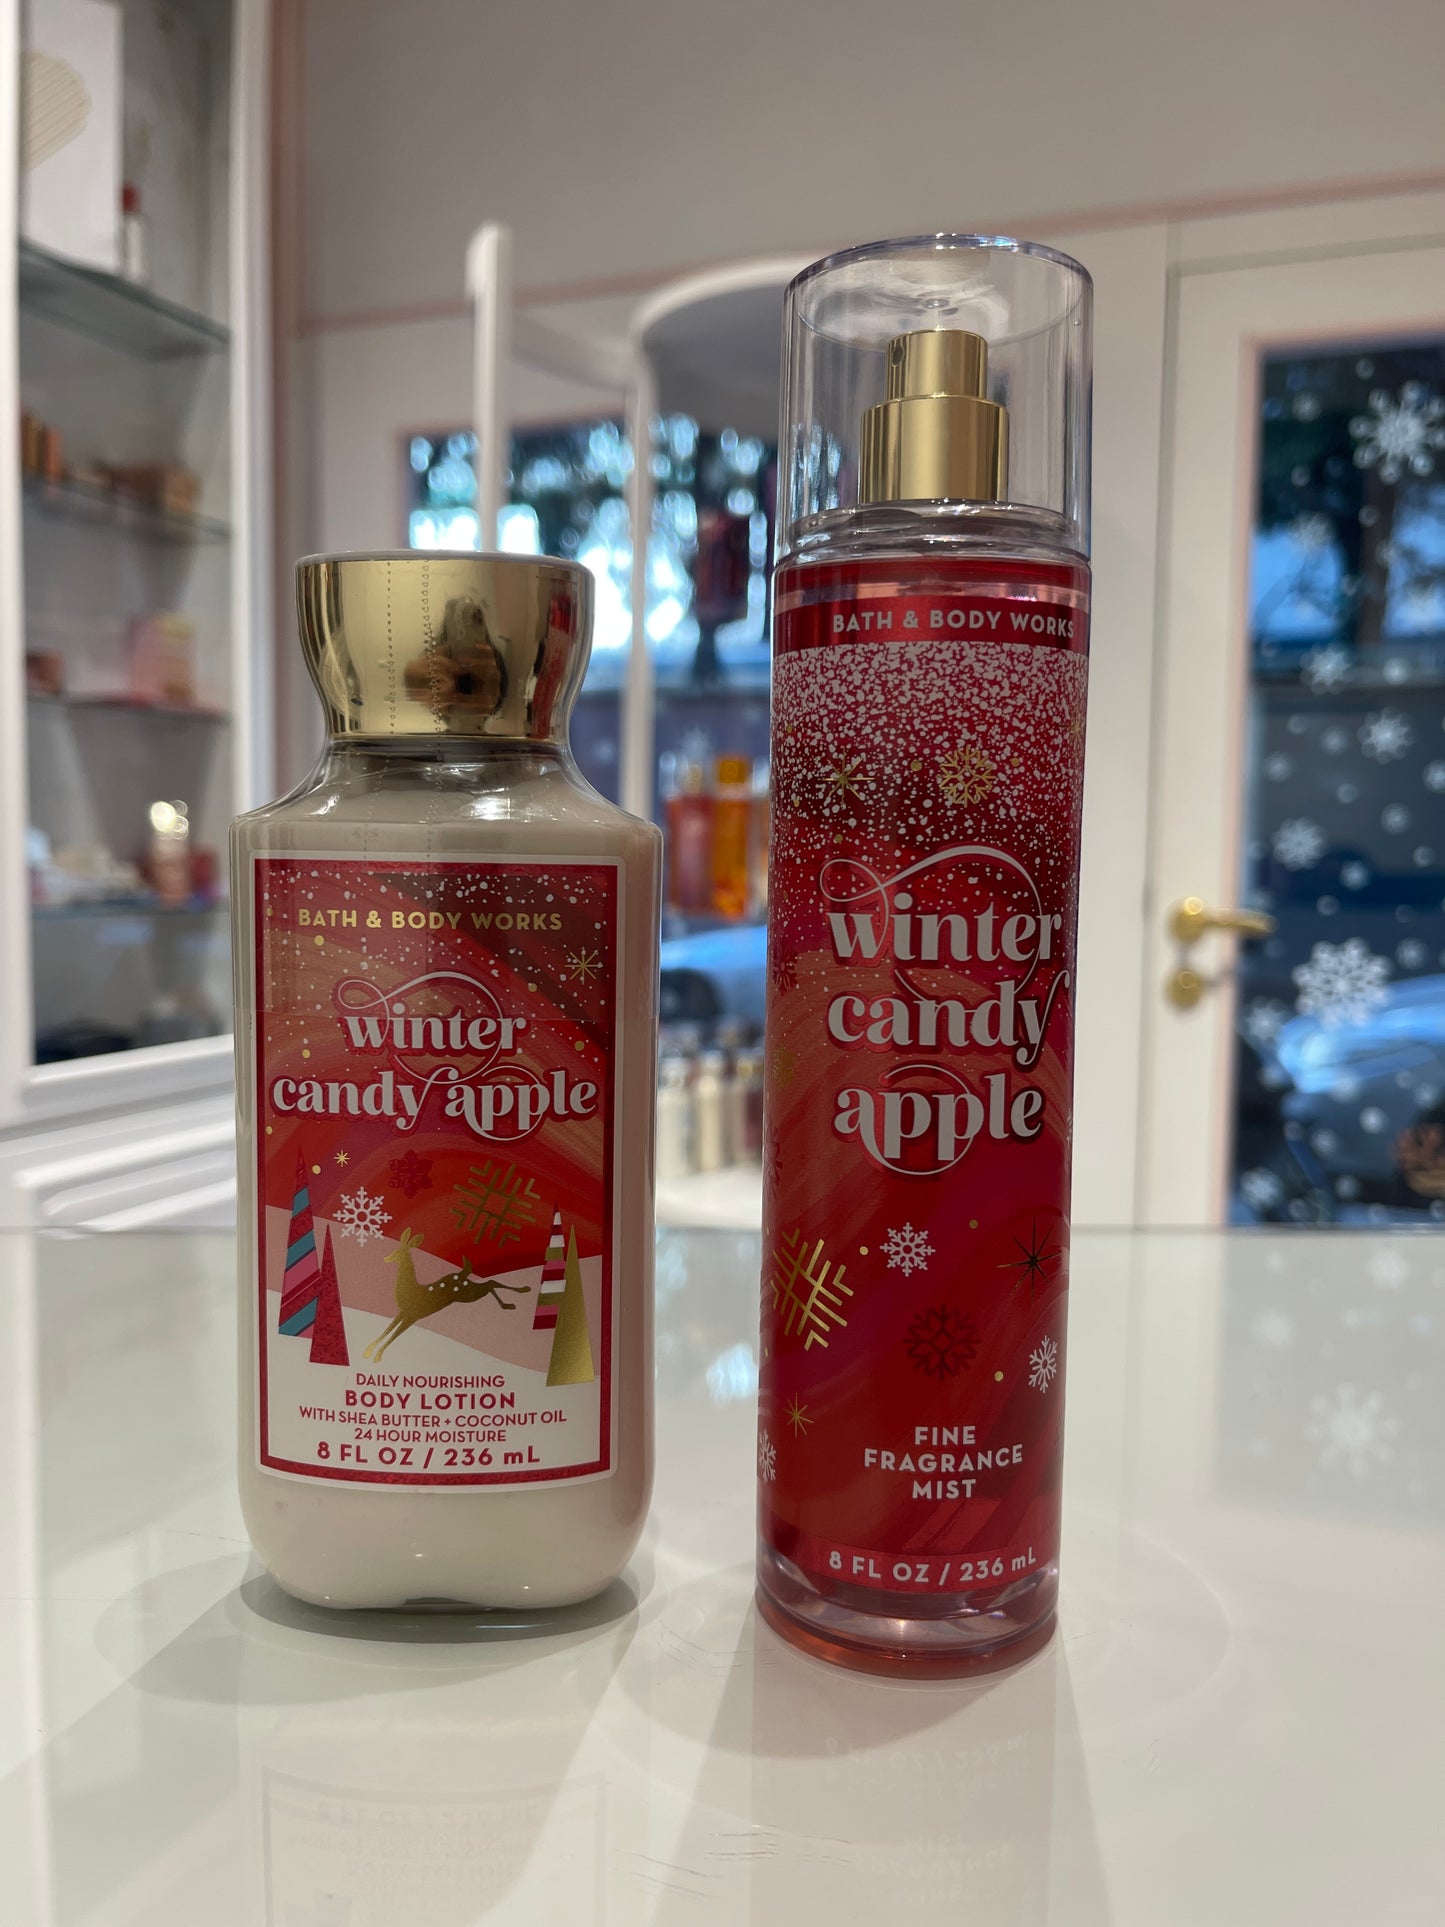 WINTER CANDY APPLE - MIST ONLY